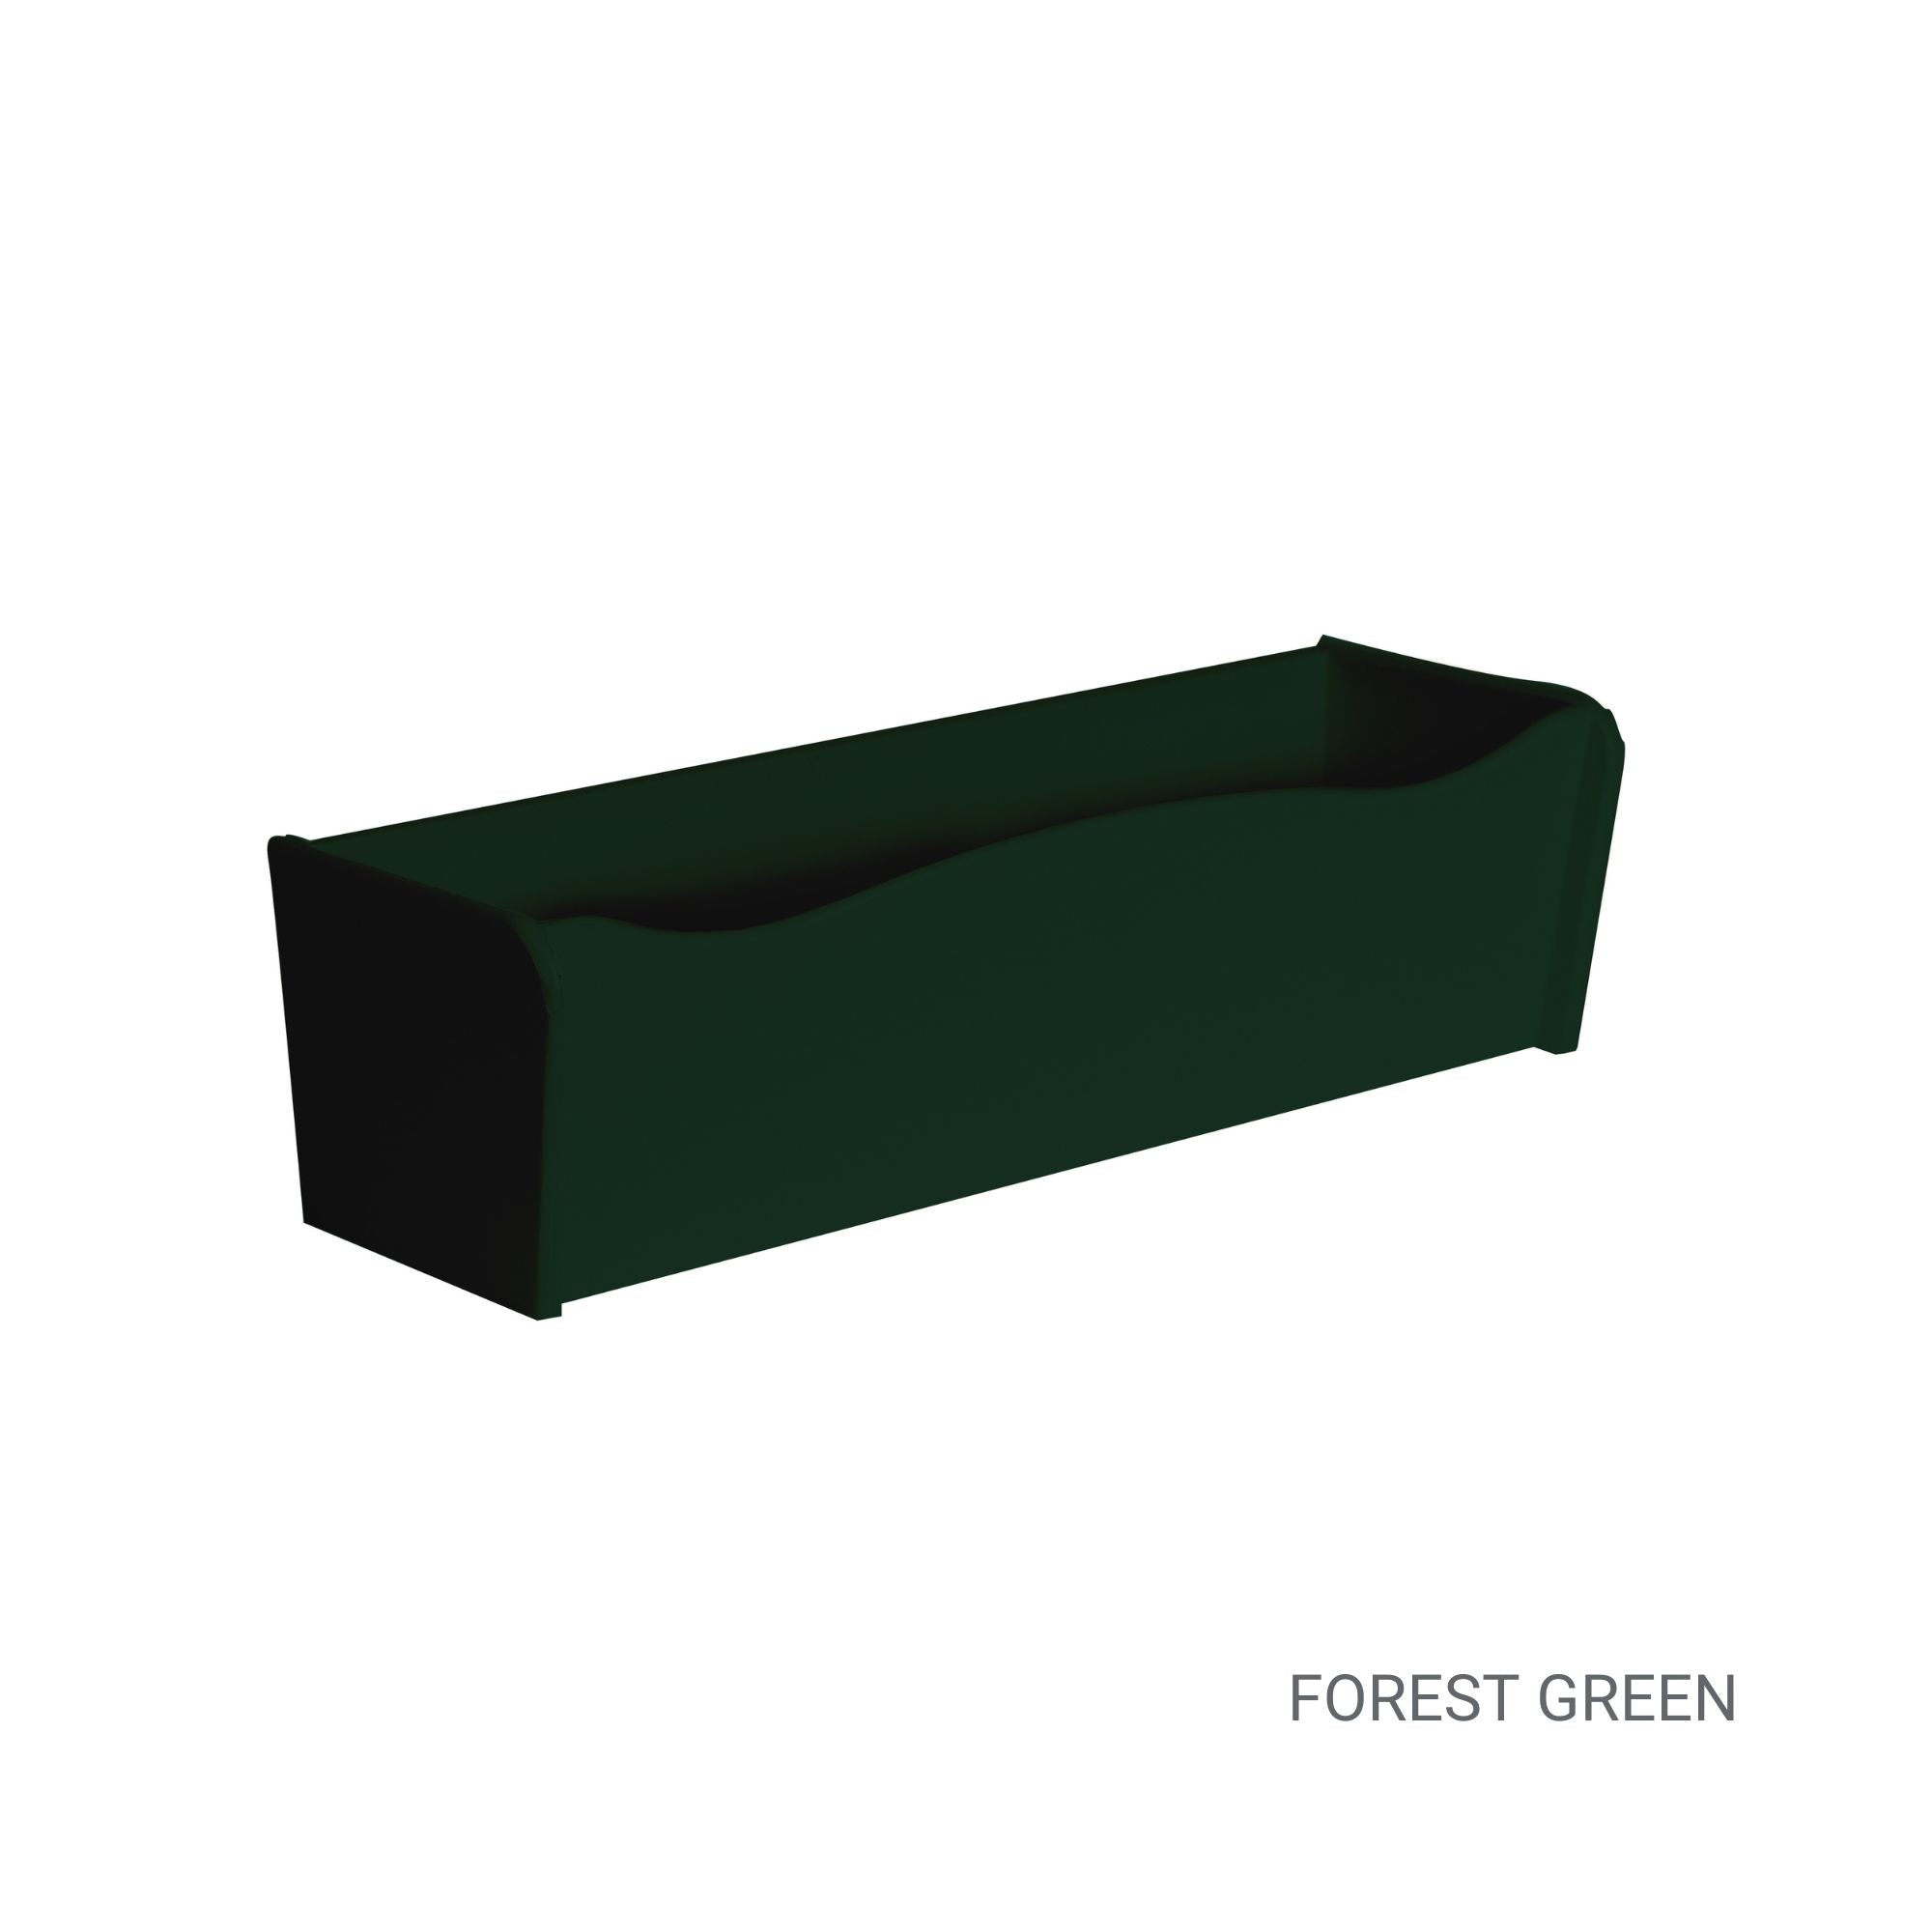 18" x 6" x 5" Forest Green Flower Box for Window Sills, Sheds, Playhouses, and MORE